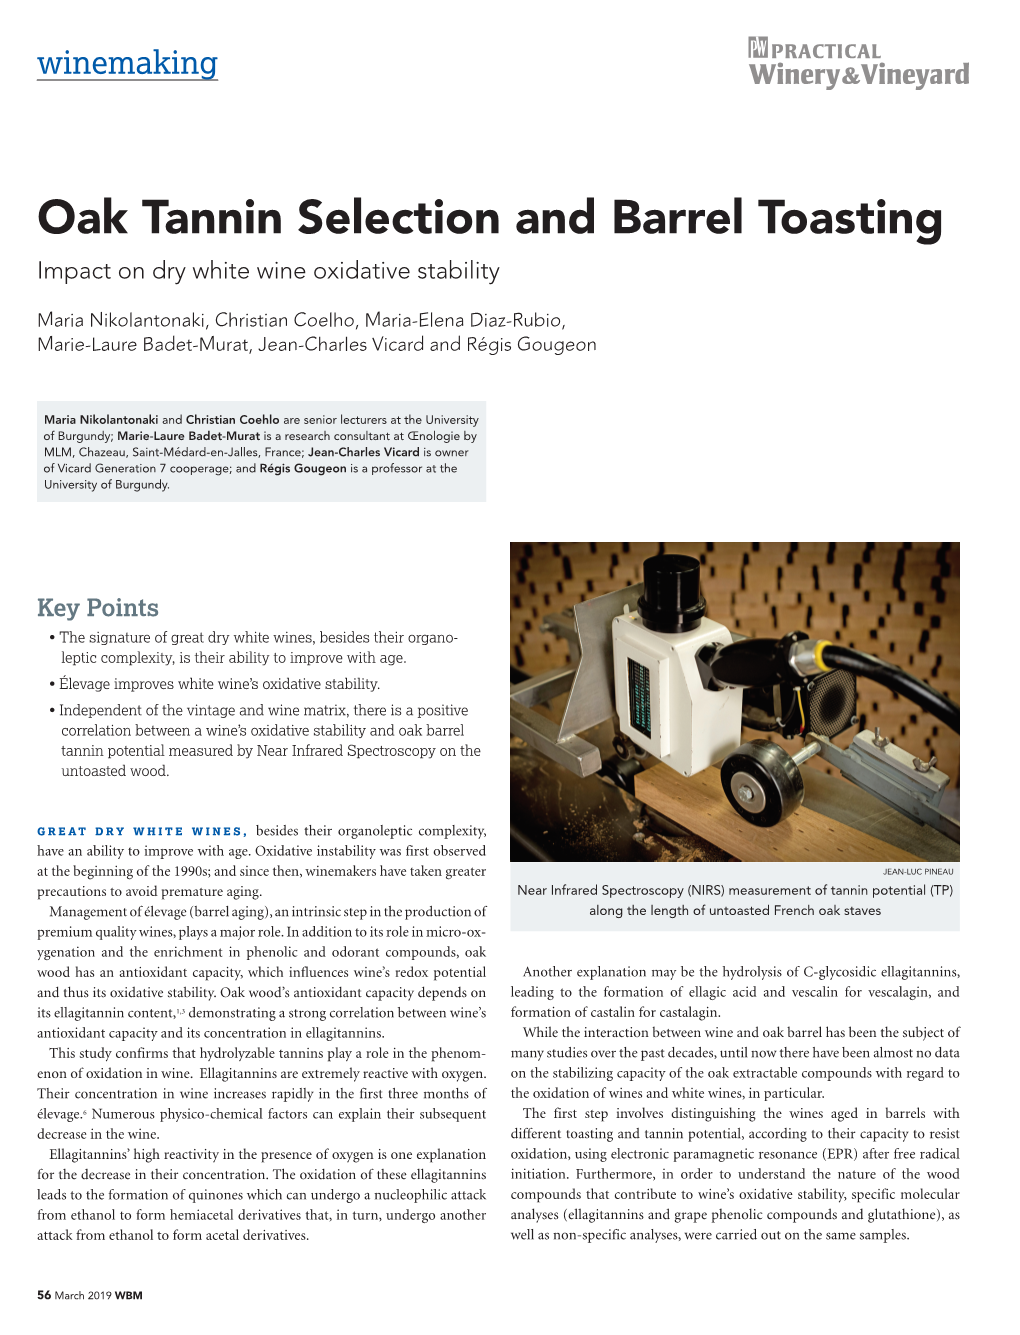 Oak Tannin Selection and Barrel Toasting. Impact on Dry White Wine Oxidative Stability